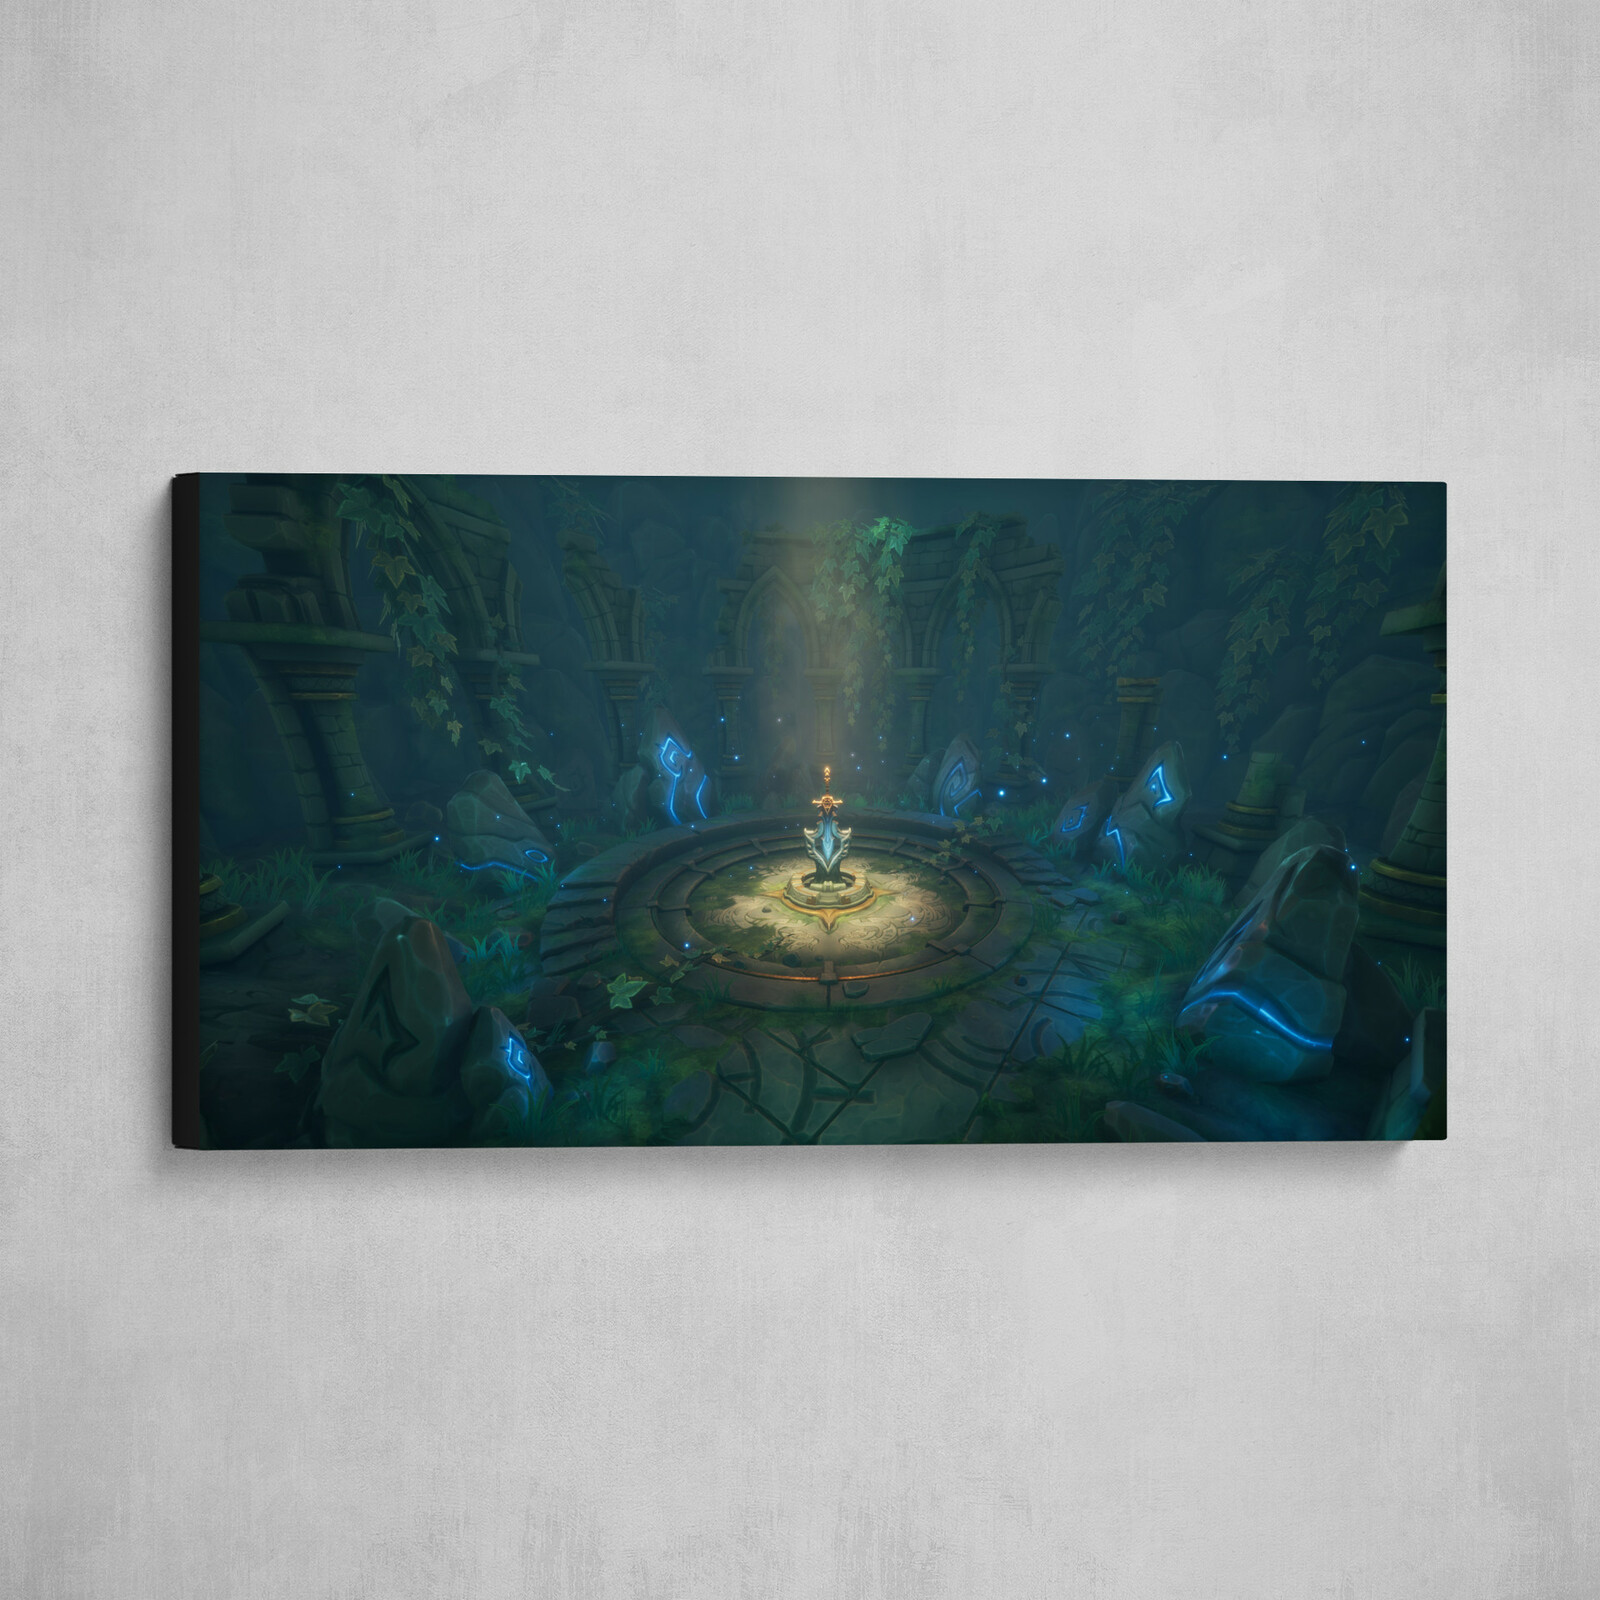 You can now buy an art print of my final submission here : https://www.artstation.com/prints/art_print/E2R7/the-legend-of-king-arthur-artstation-challenge